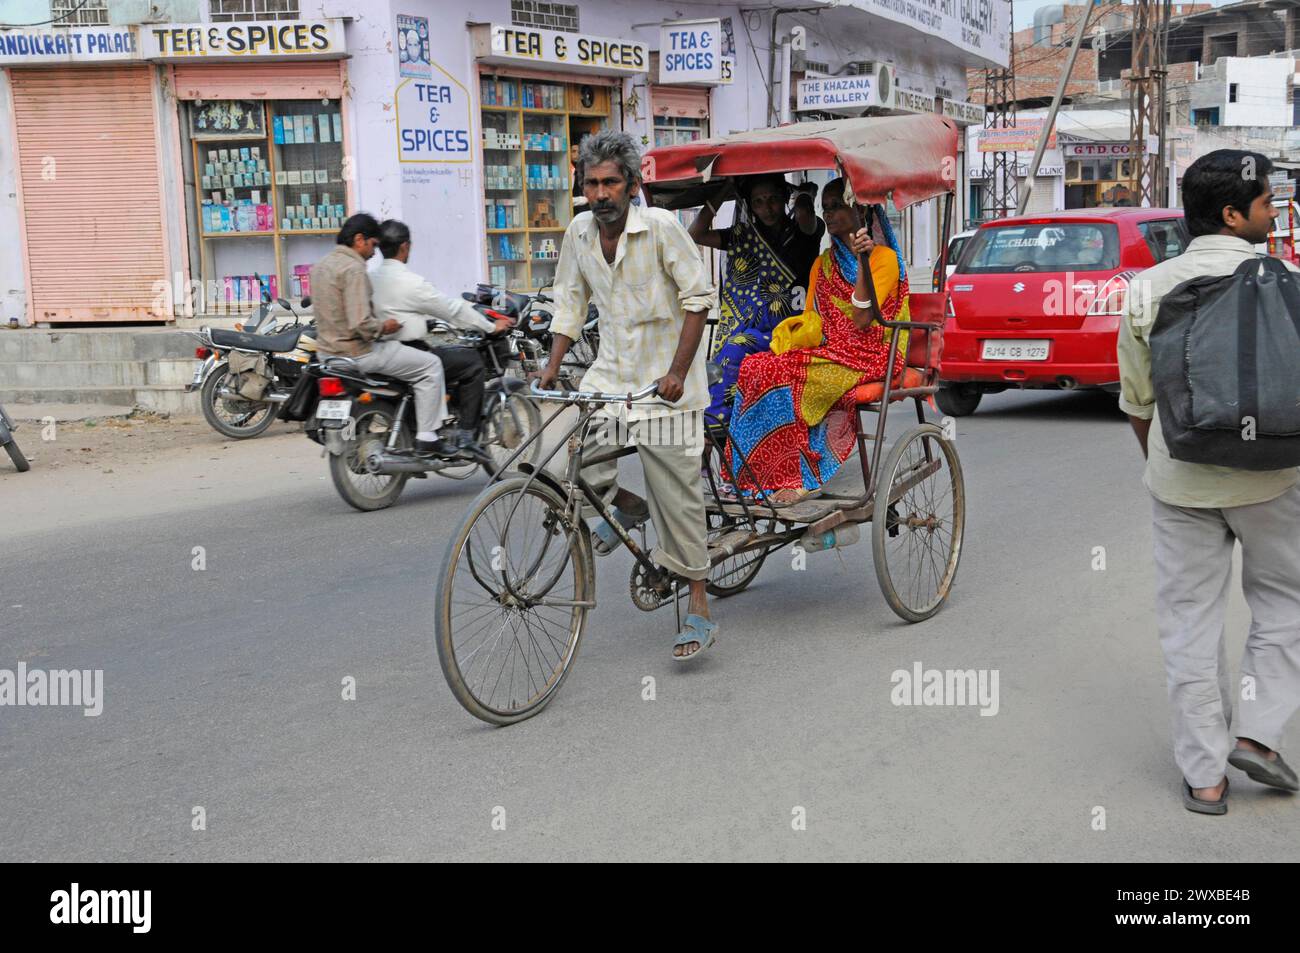 A cycle rickshaw transports passengers on a busy street in a city, Jaipur, Rajasthan, India Stock Photo